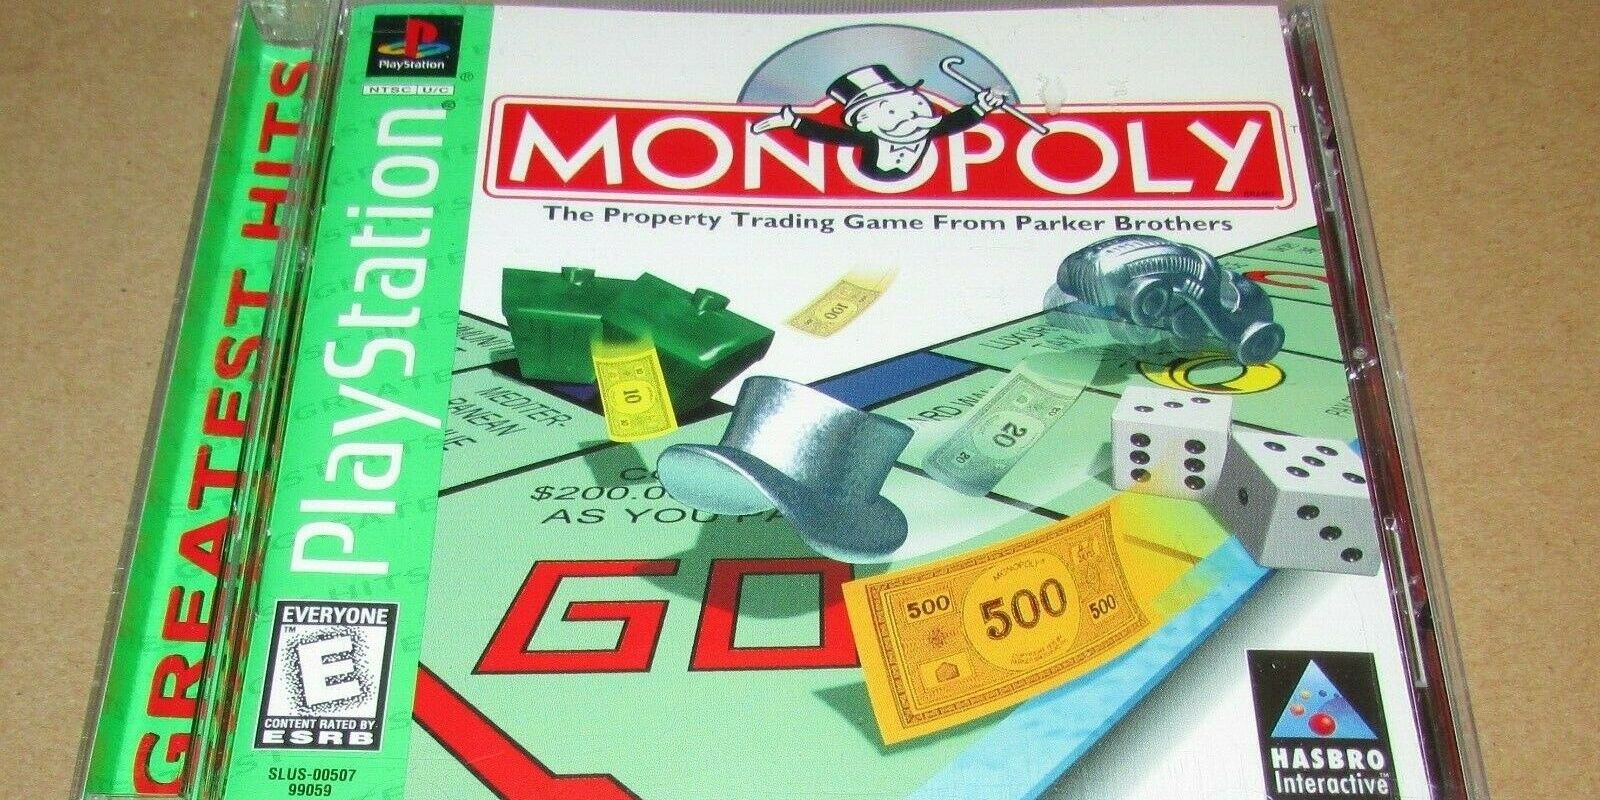 Monopoly case for the PS1